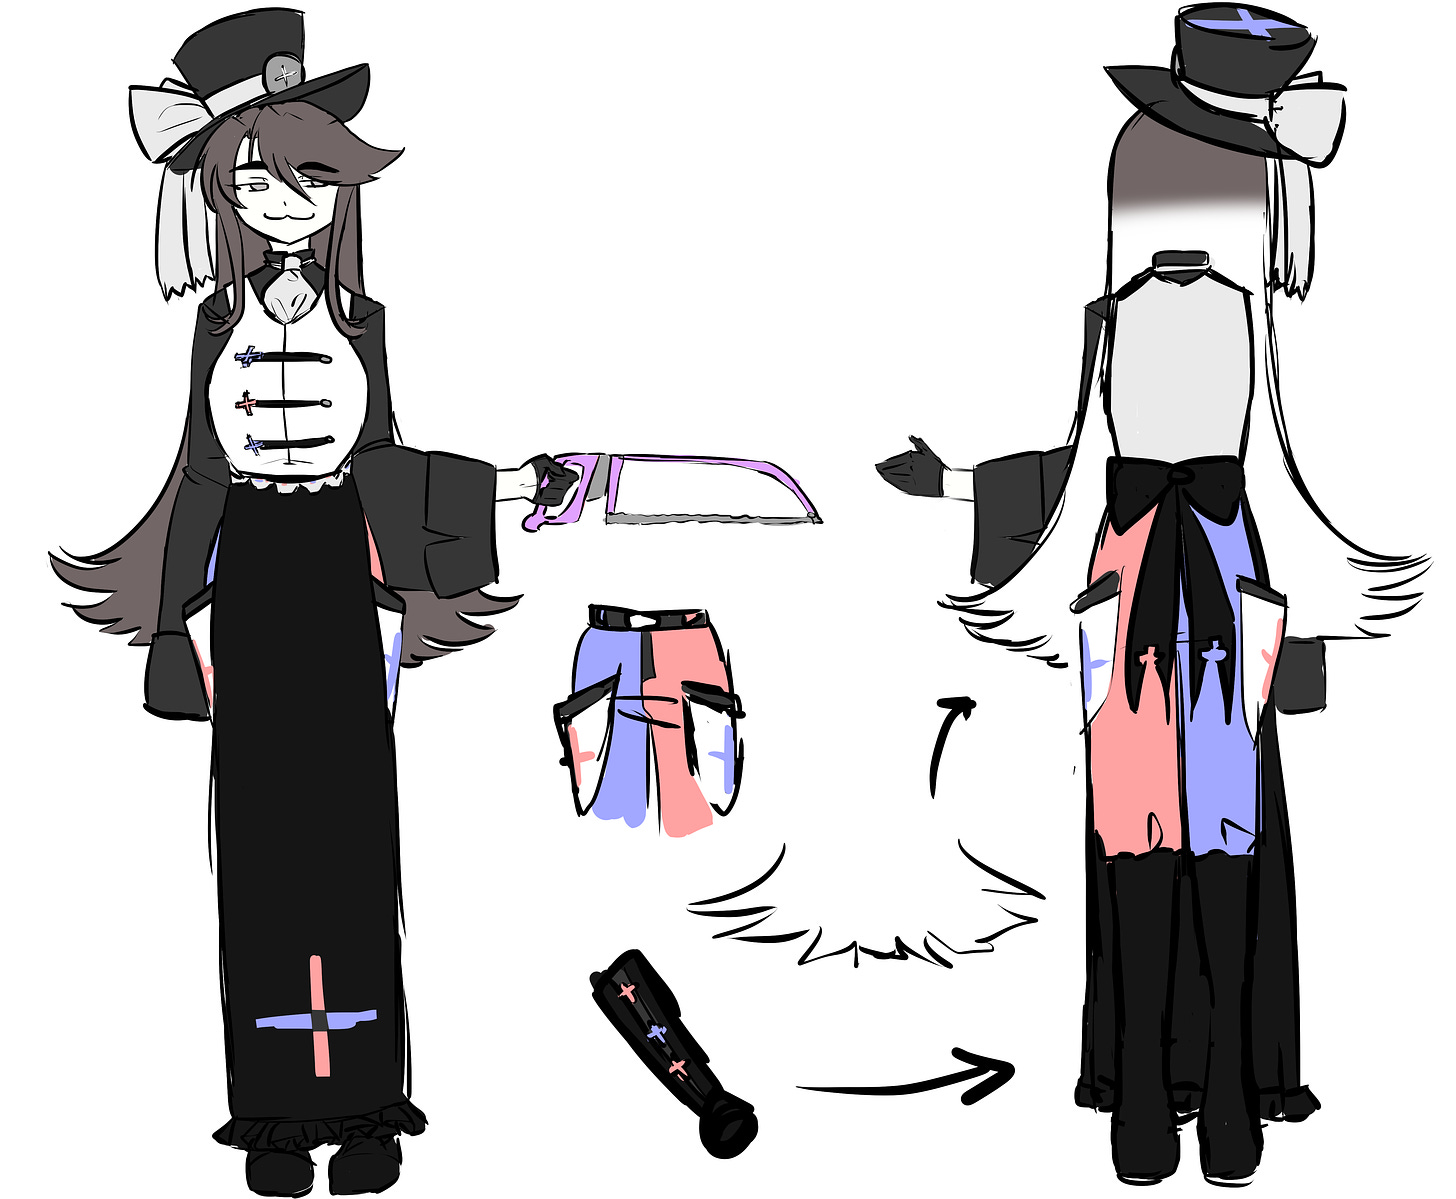 new milk+ visual mascot monochrome matrimony's design sheet. she has a smug face and thick brows, pale skin, pale grey eyes, and long greyish hair that has a tendency to curl upwards. she wears a top hat and a frilly victorian surgeon uniform, as well as knee-high boots and short gloves. she wields a purple hacksaw. her outfit is primarily greyscale with splashes of pink and blue and lots of plus motifs.